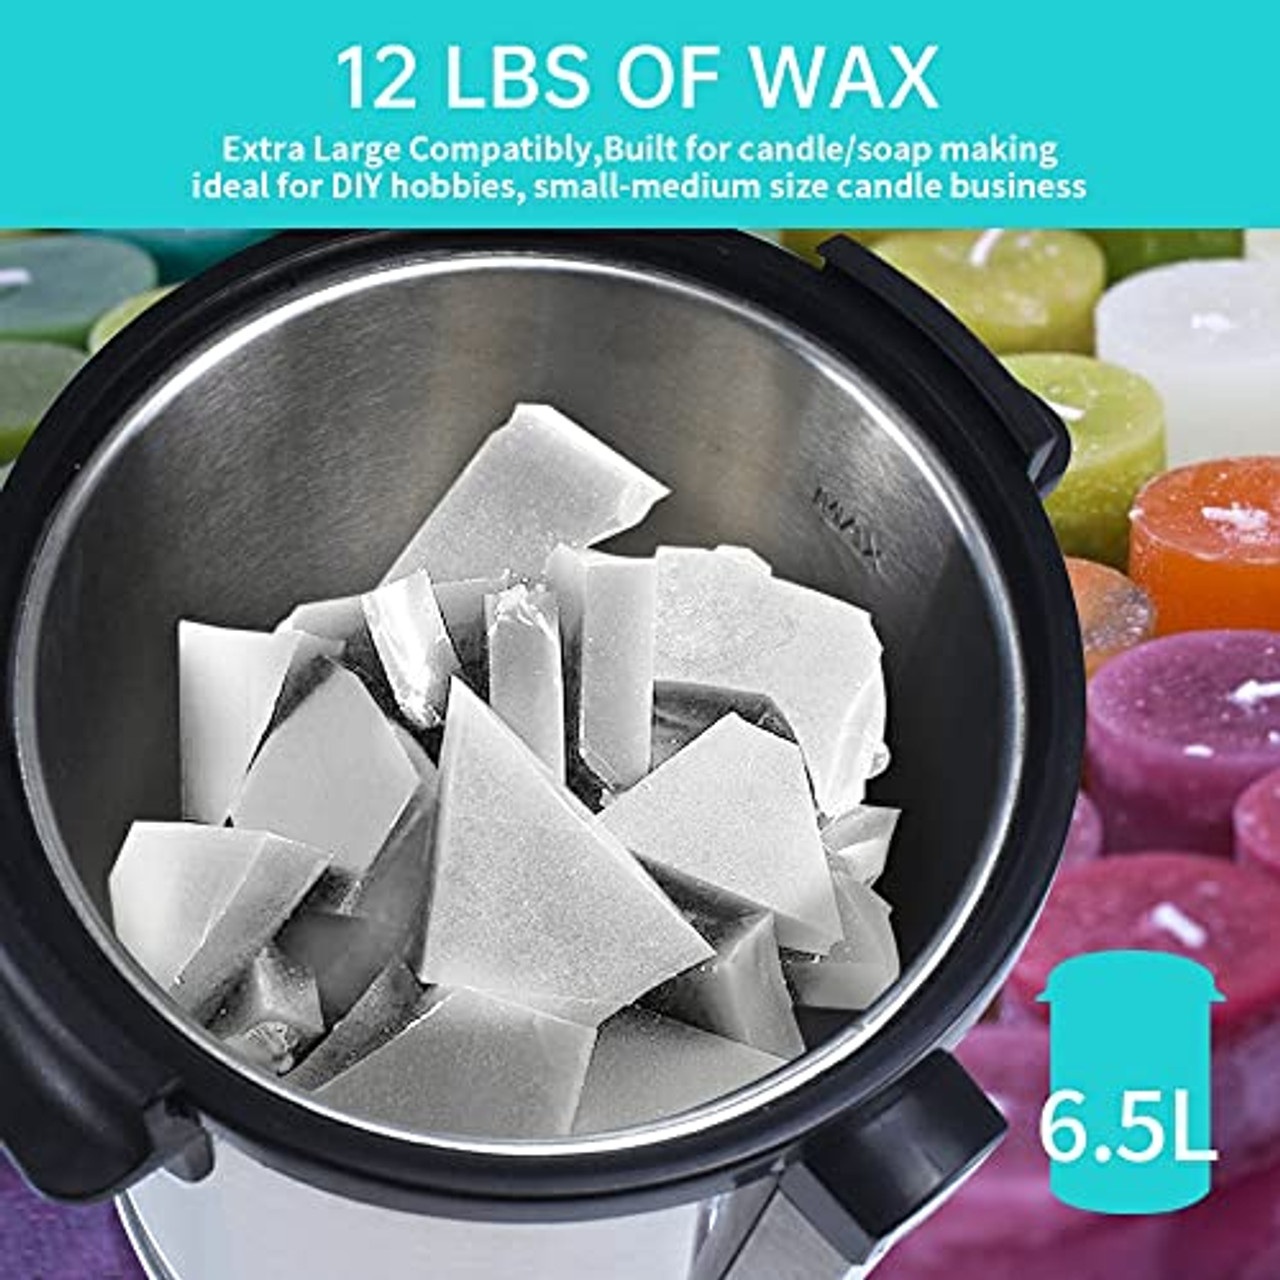 TOAUTO Soy Wax Electric Wax Melter for Candle Making Soap Melting